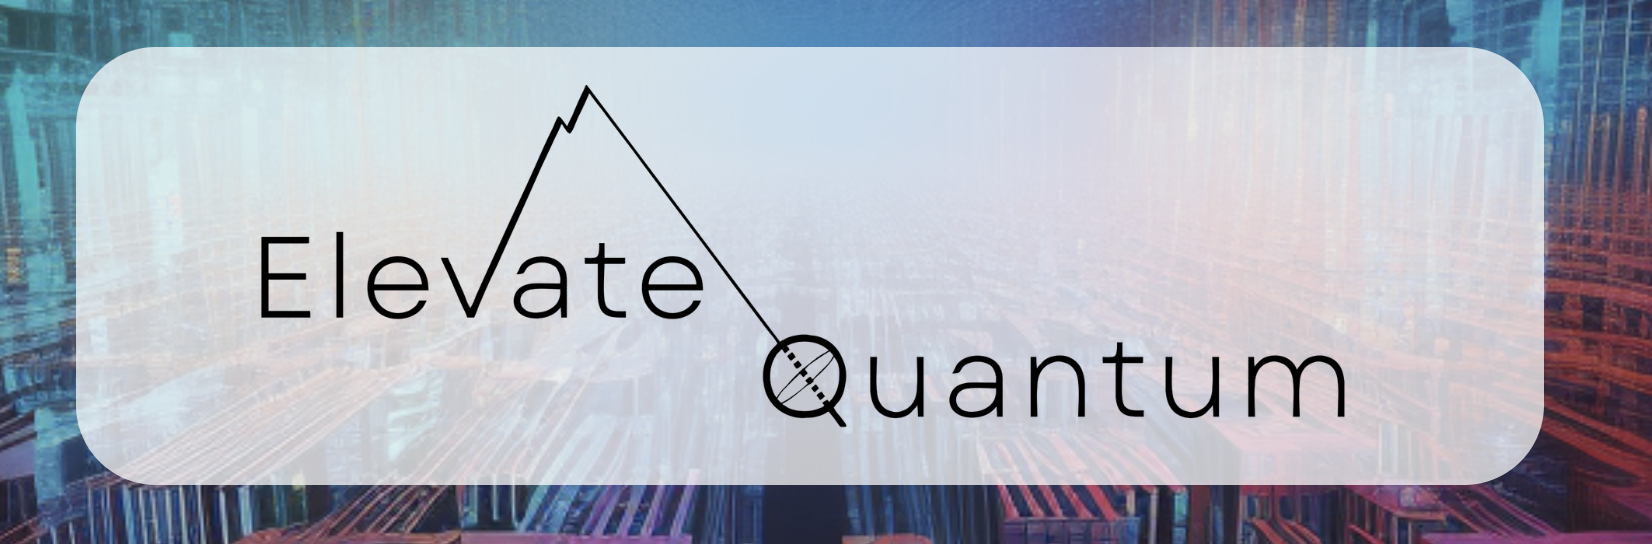 Governor Polis and Governor Lujan Grisham Urge the Department of Commerce to Fund the Regional Quantum Partnership with Phase 2 Implementation Grant